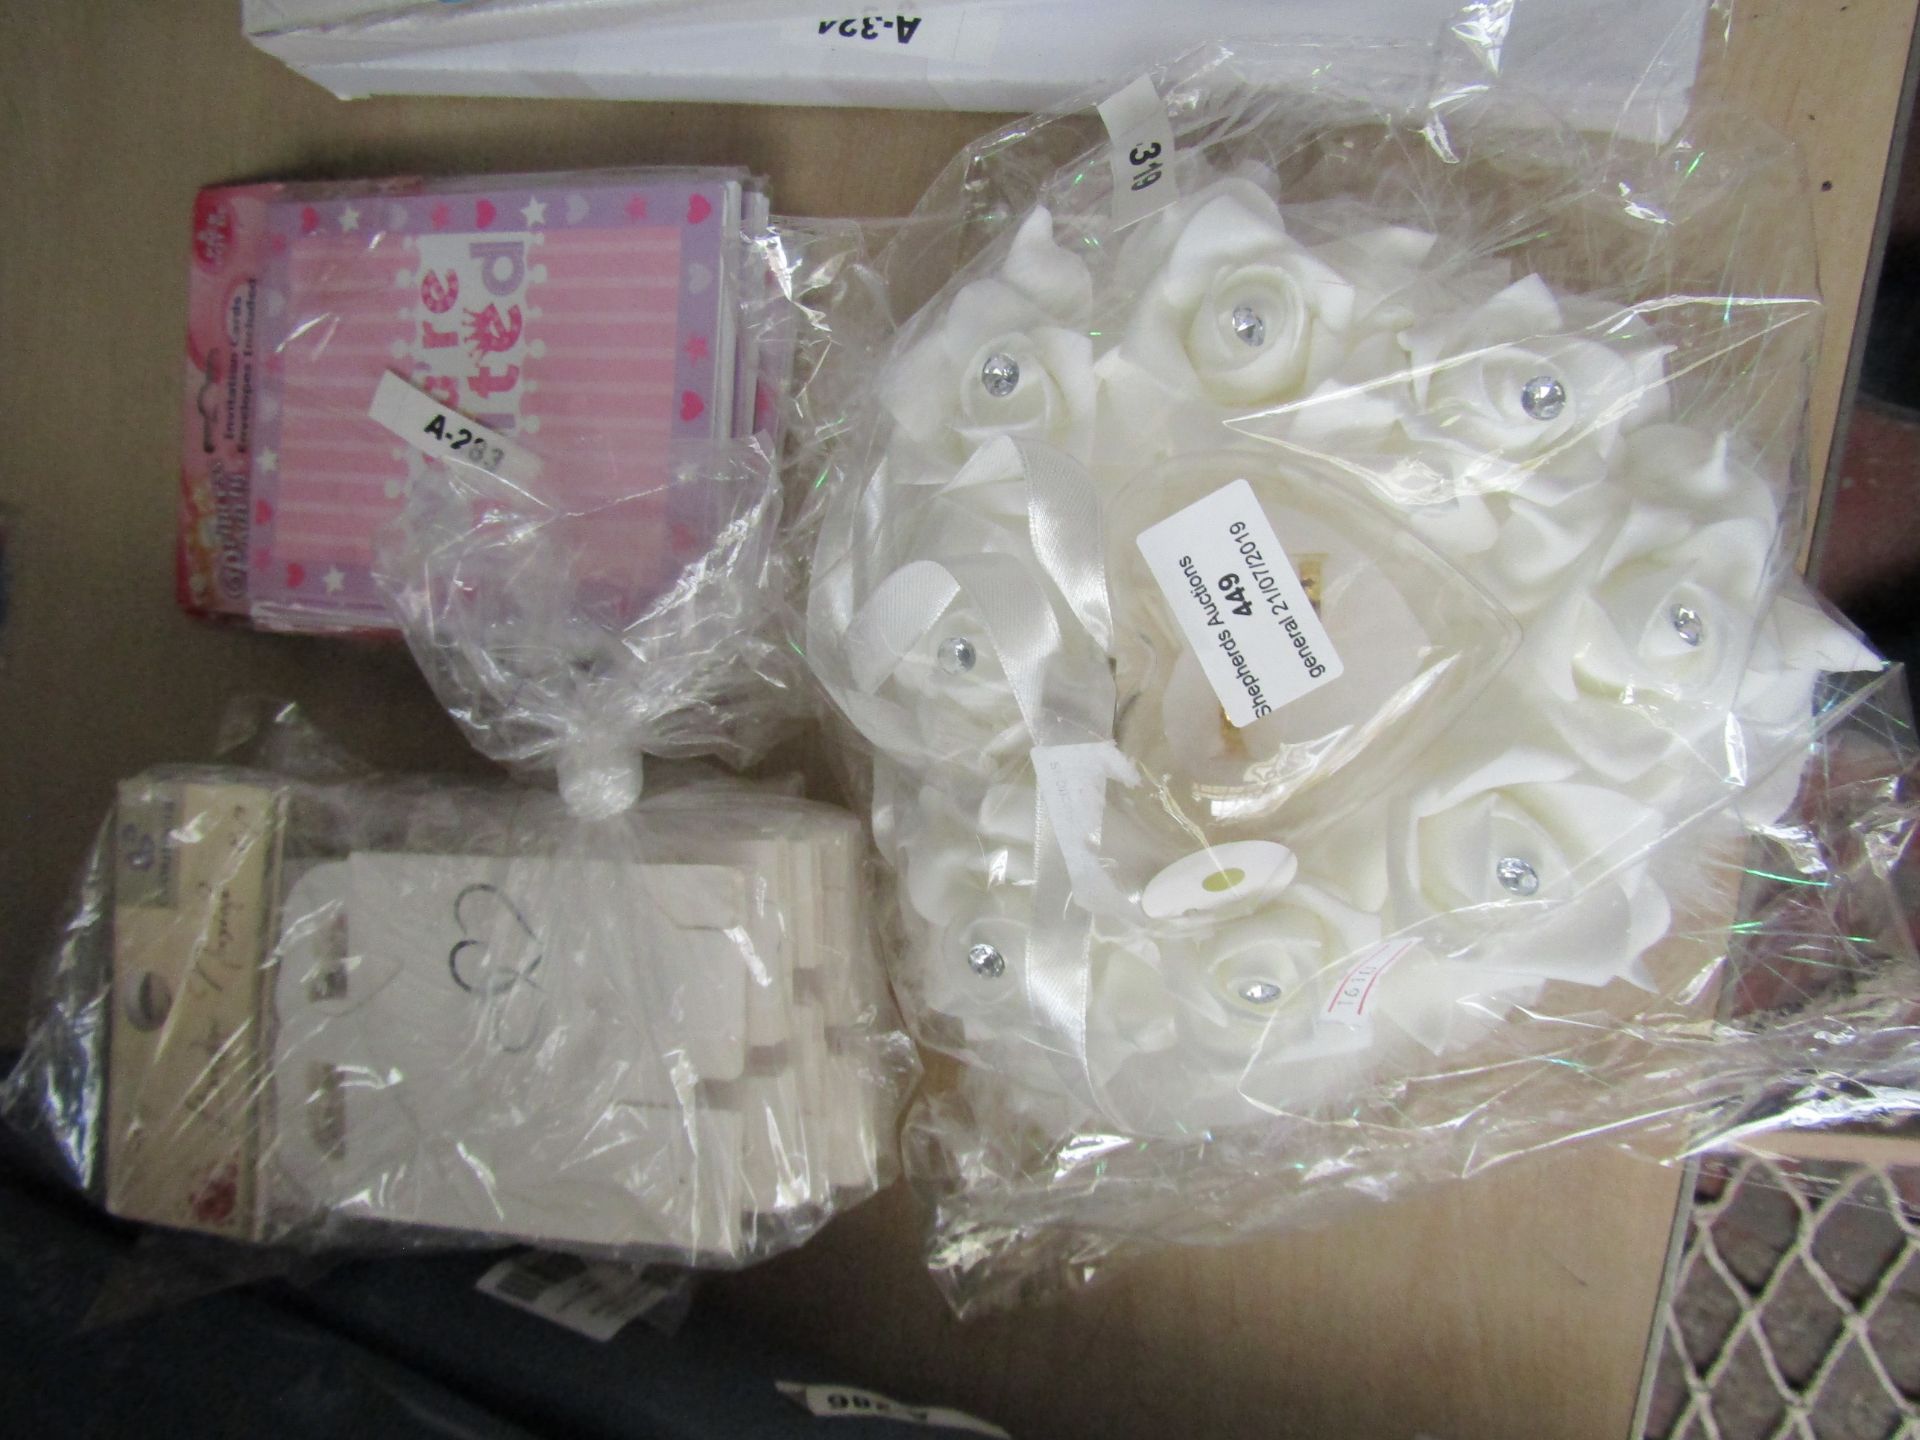 3 lots of wedding items,invitations,ring holder and gift boxes,new in packaging